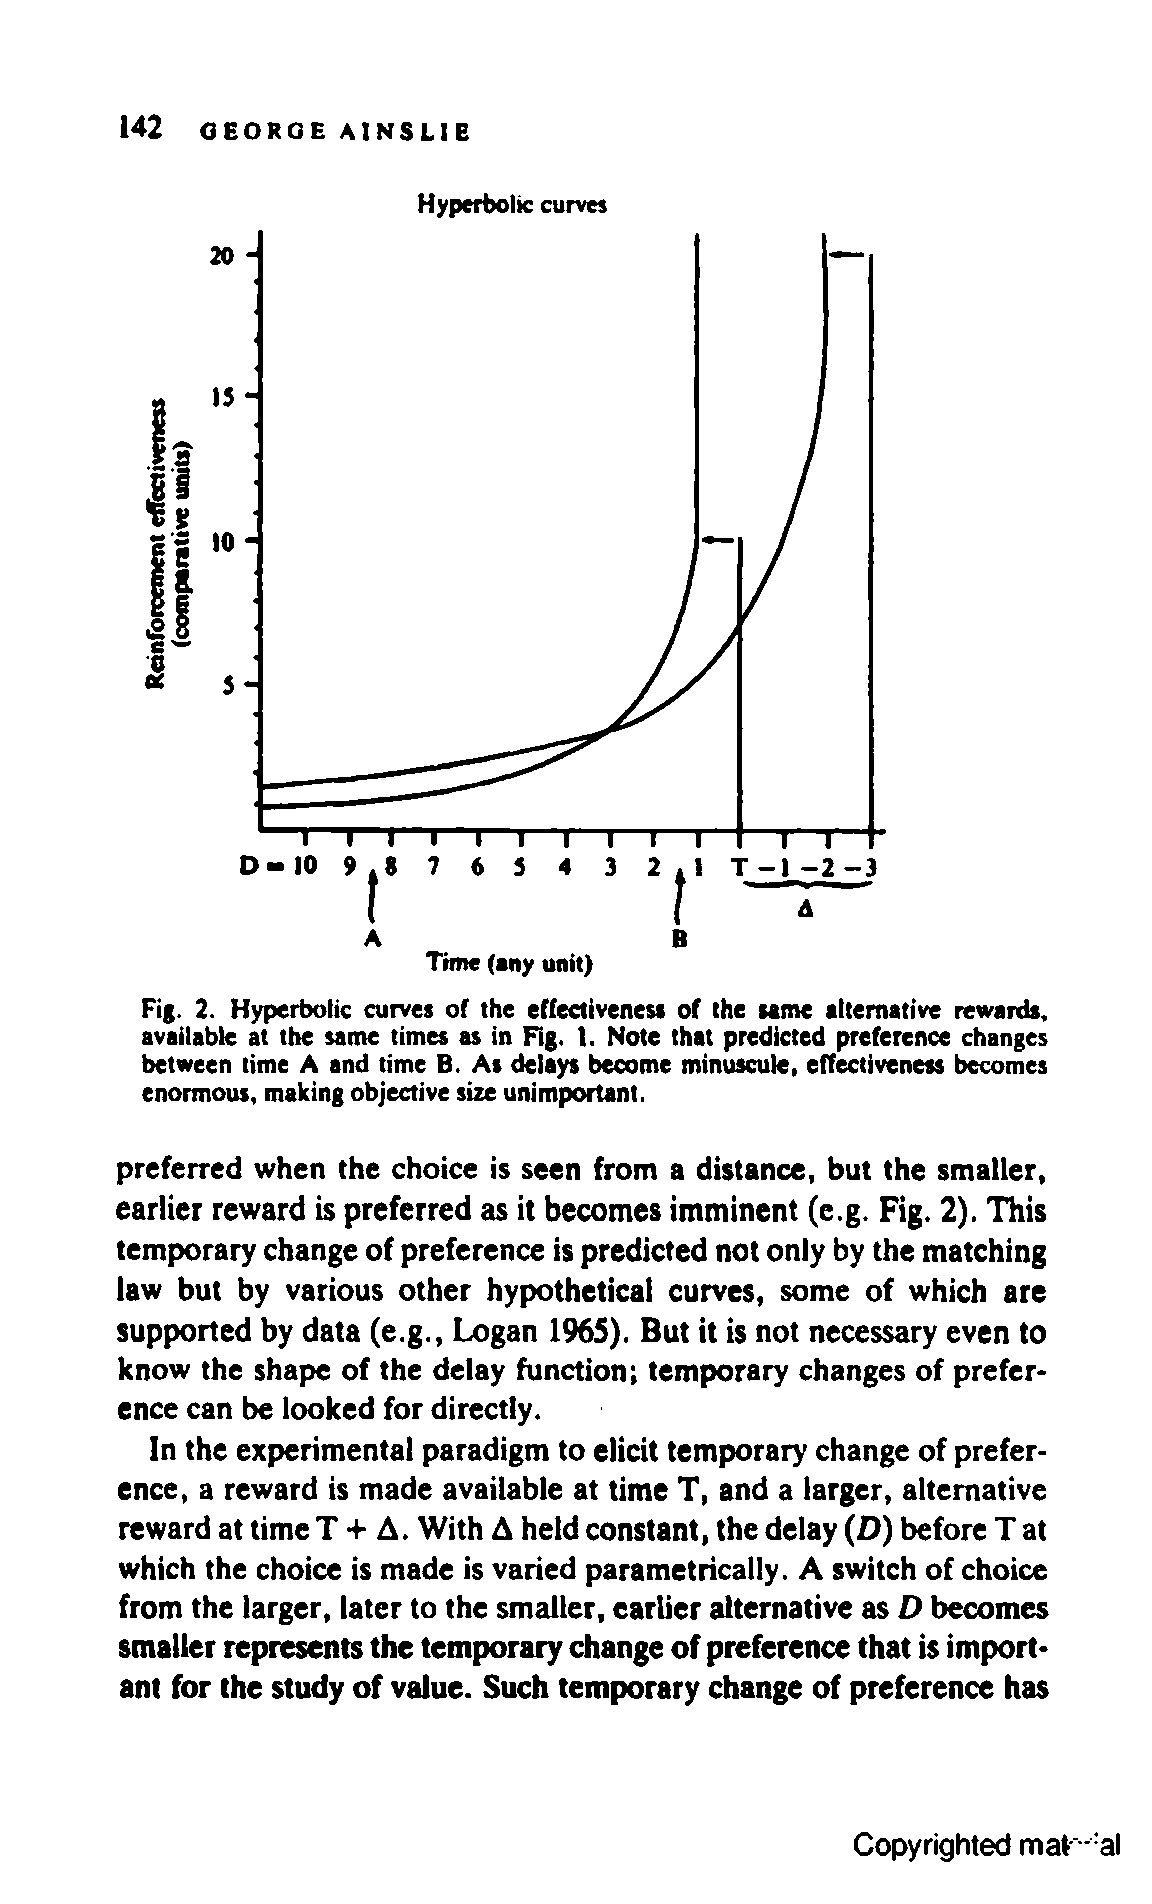 Fig. 2. Hyperbolic curves of the effectiveness of the seme alternative rewards, available at the same times as in Fig. 1. Note that predicted preference changes between time A and time B. As delays become minuscule, effectiveness becomes enormous, making objective size unimportant.